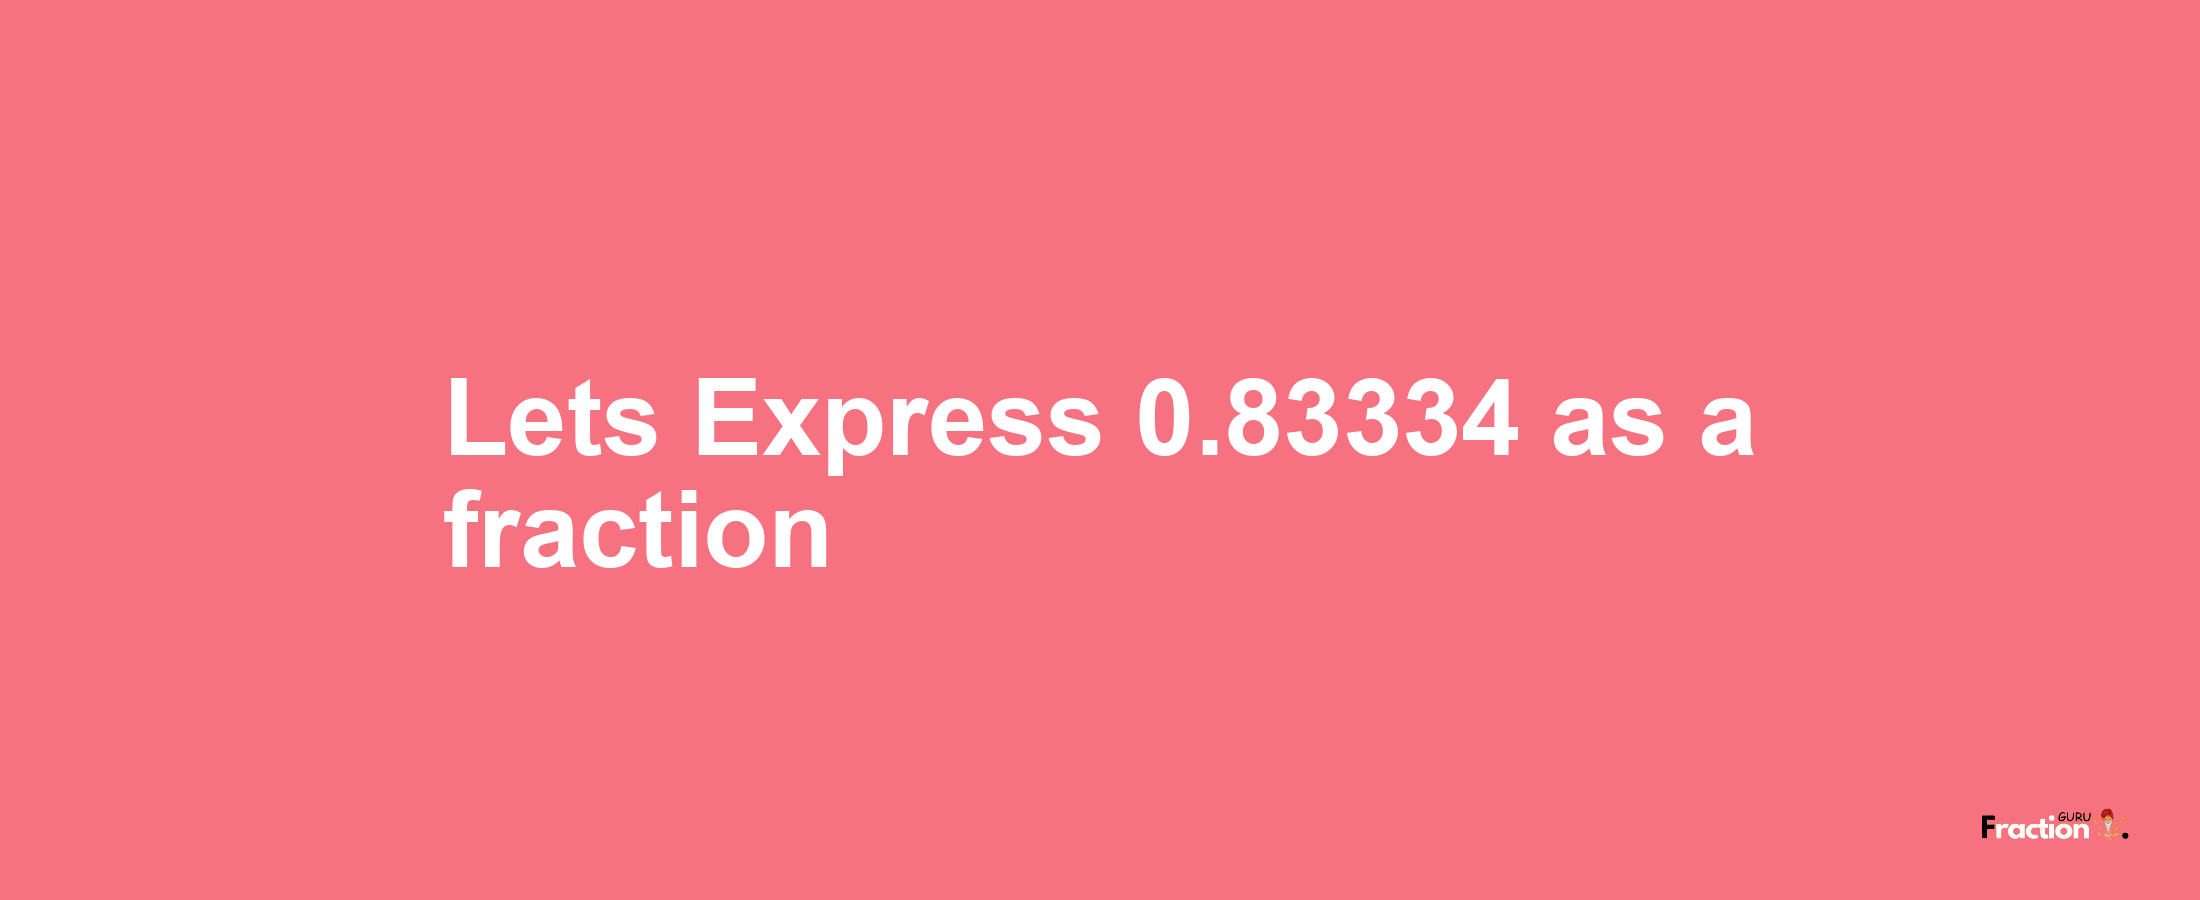 Lets Express 0.83334 as afraction